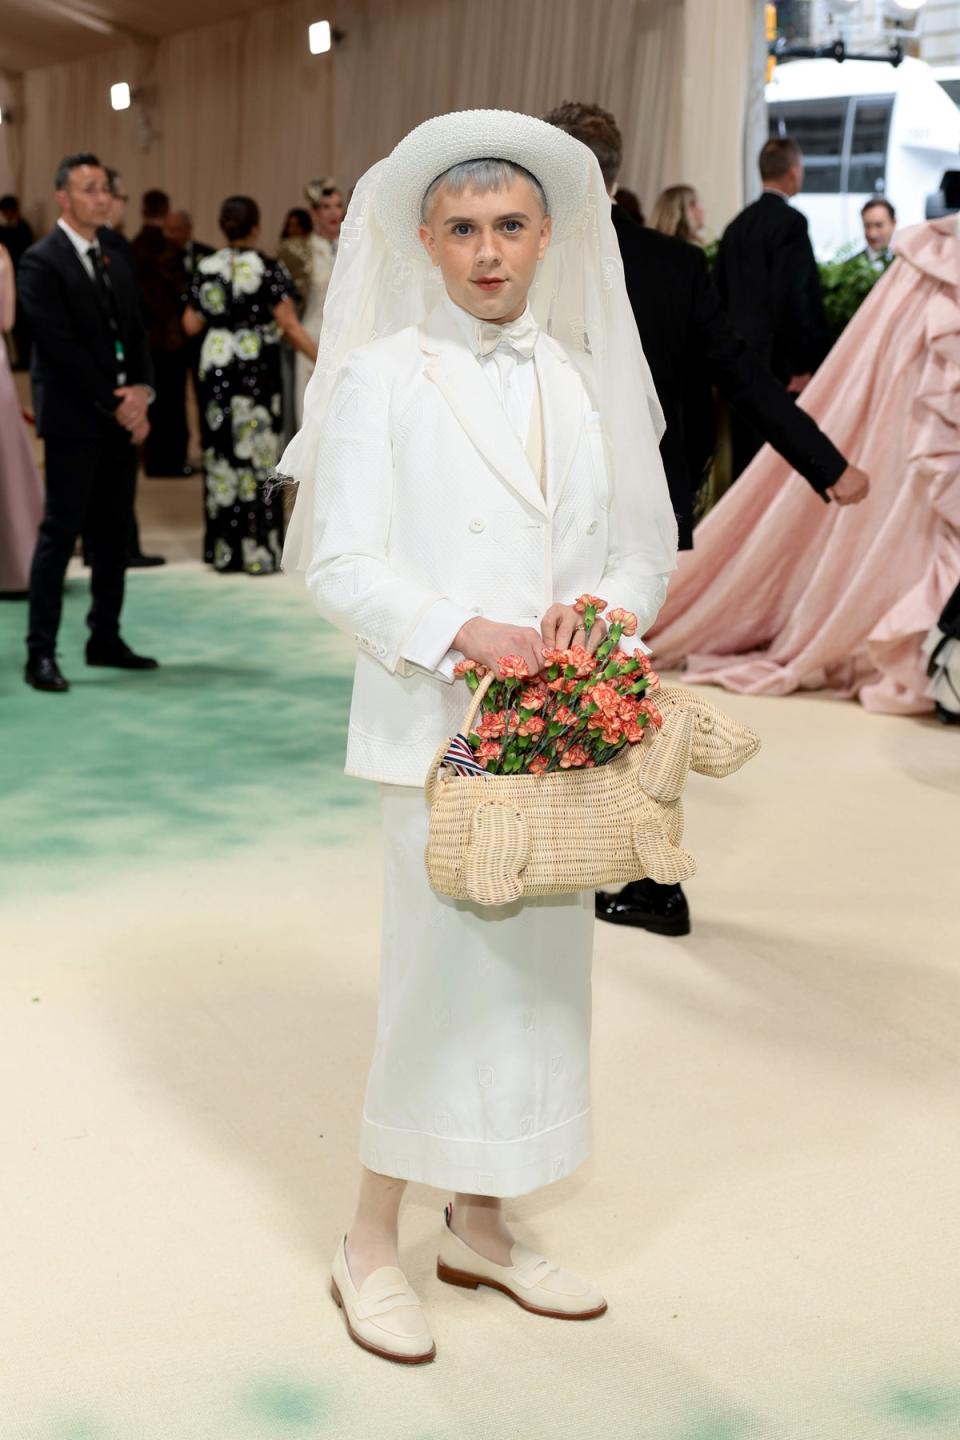 Cole Escola in Thom Browne (Getty Images for The Met Museum/)